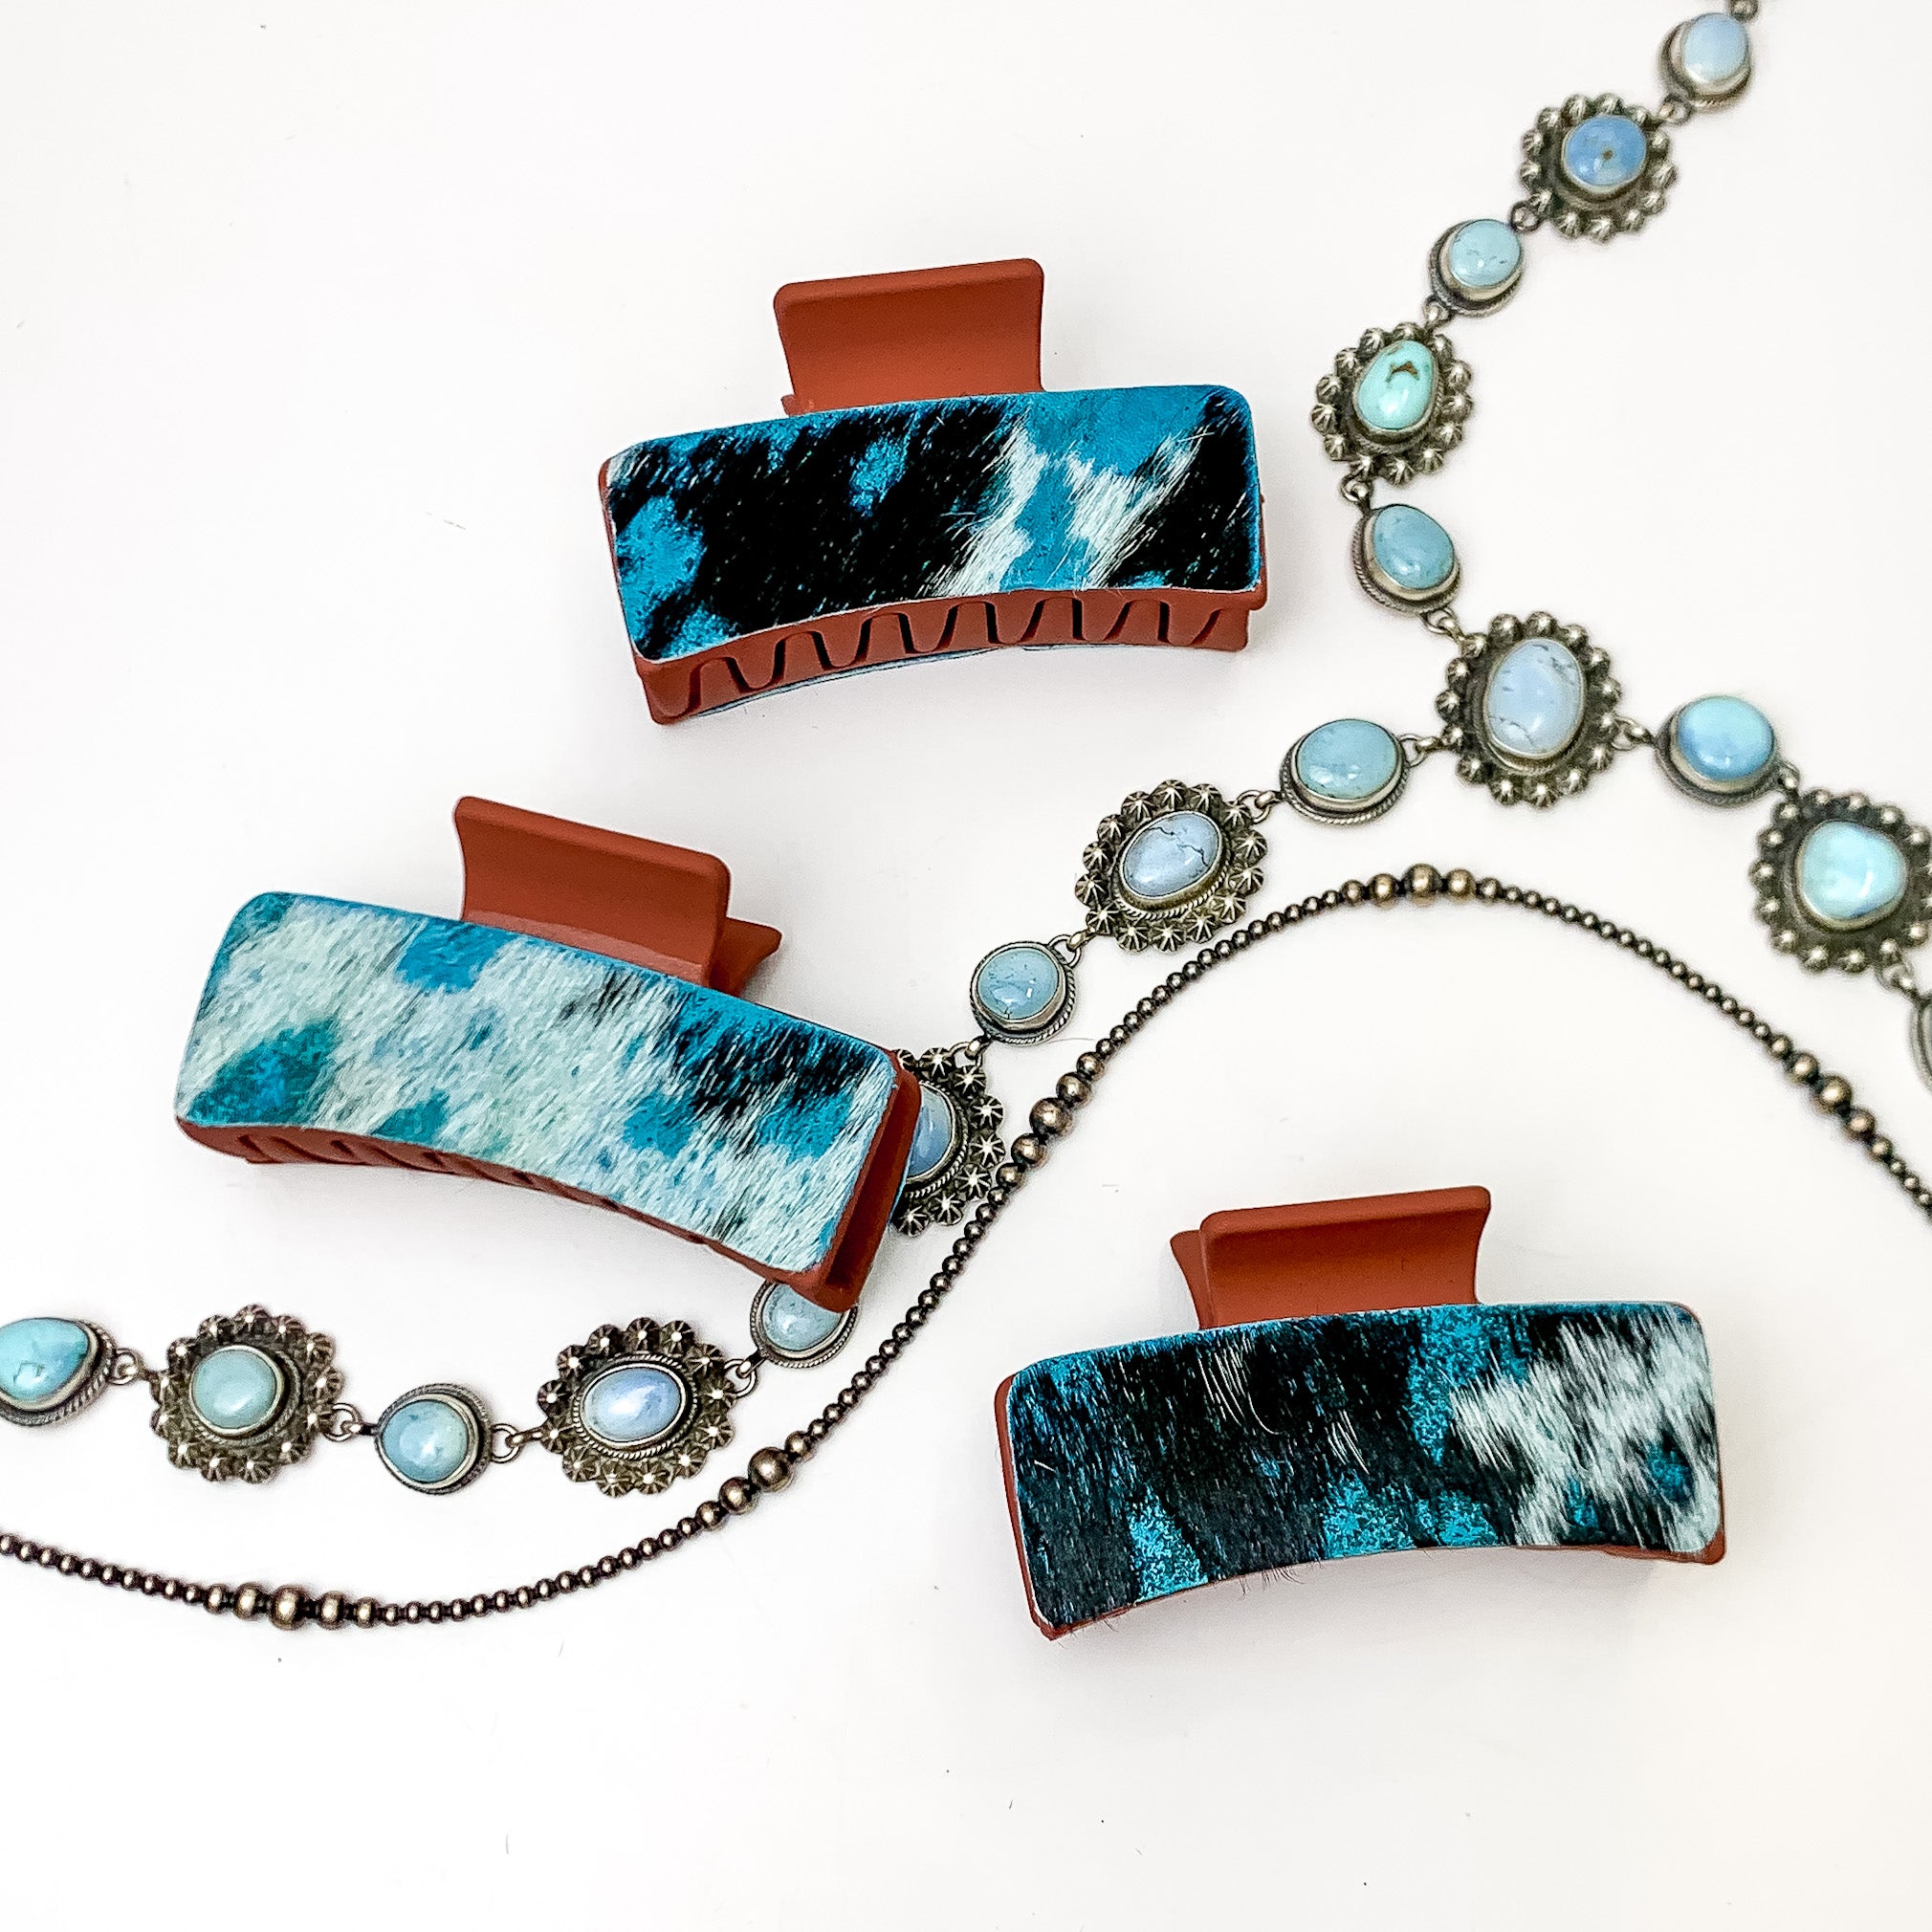 Pictured are three rust red hair clips with turquoise blue mix hide patches. These earrings are pictured on a white background with silver necklaces under the clips. 